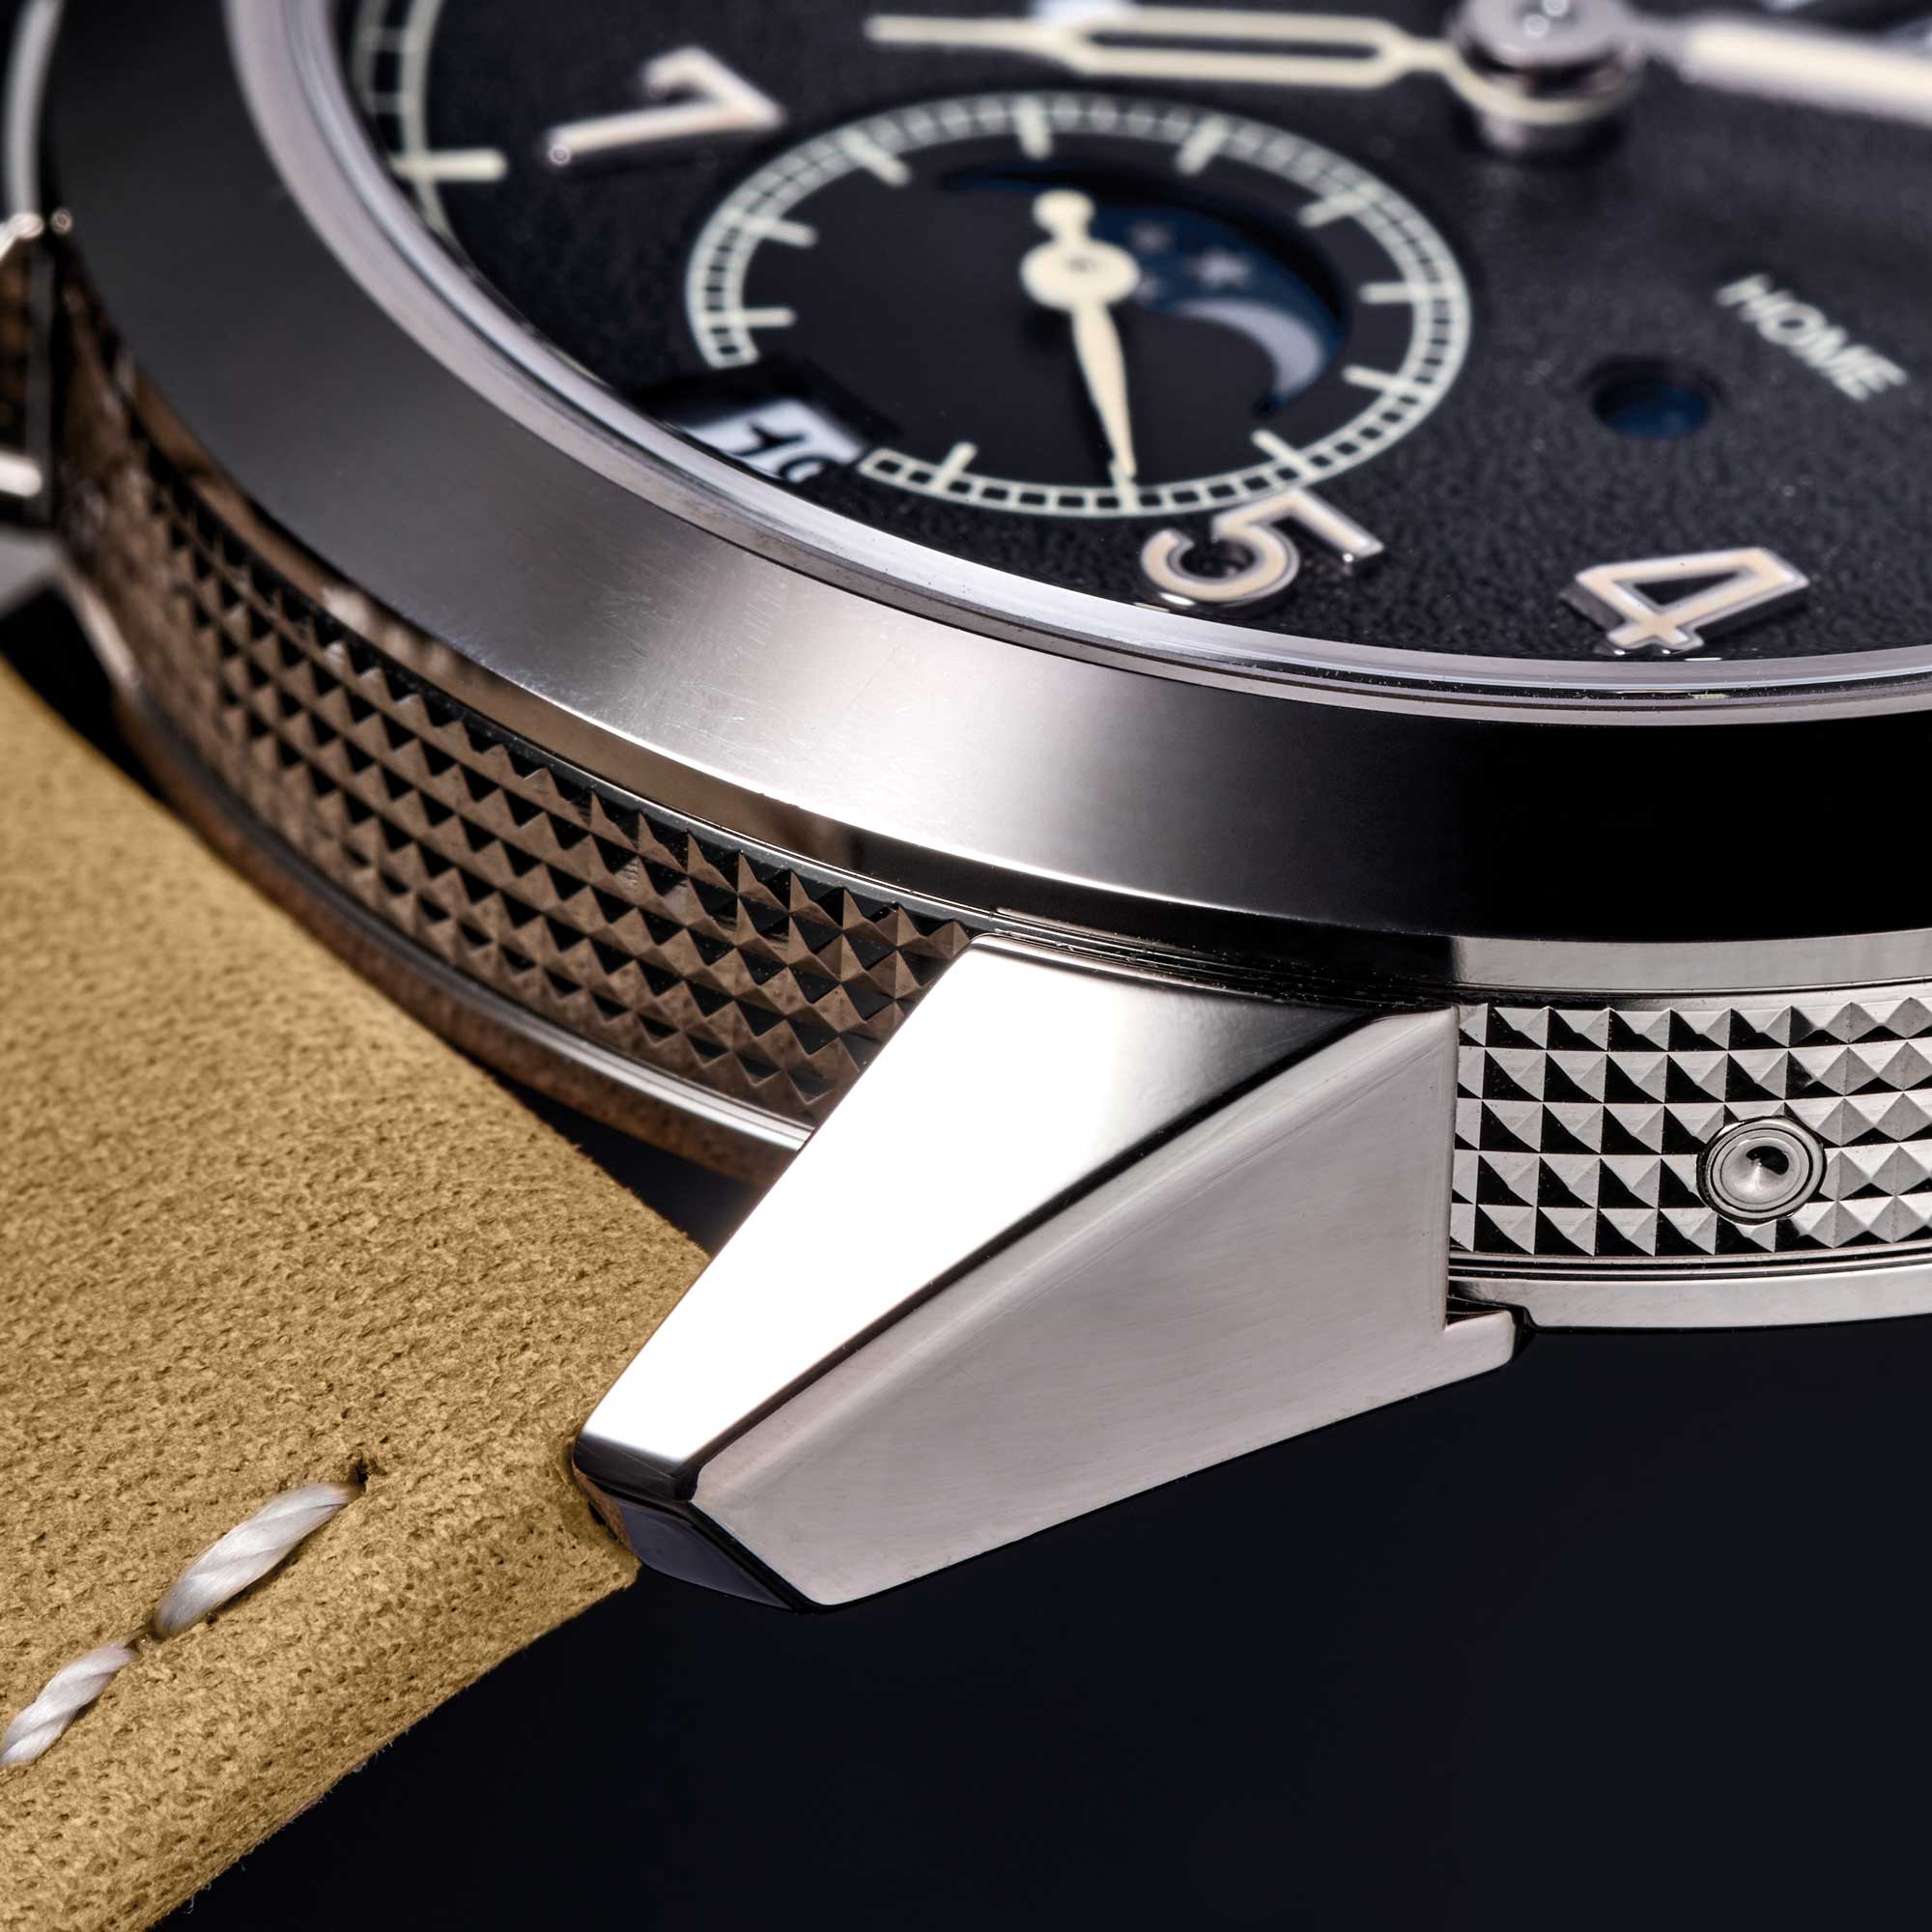 Clous de Paris engraving on the bezel is juxtaposed against the smooth and sharply angled lugs